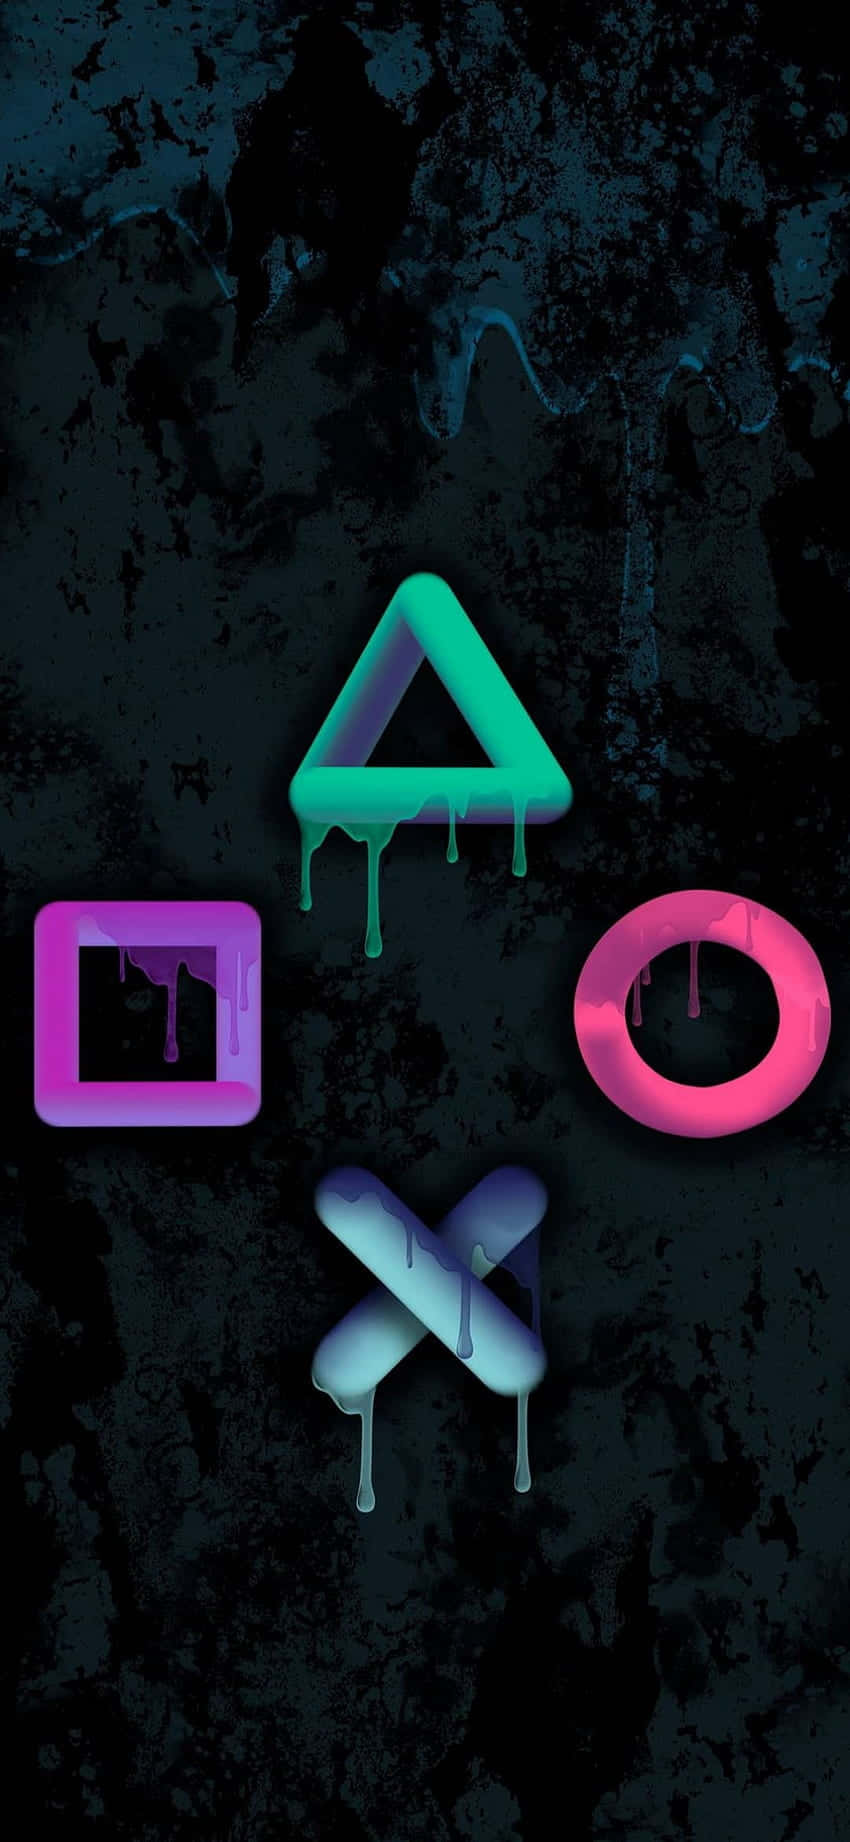 A Colorful Playstation Logo On A Black Background